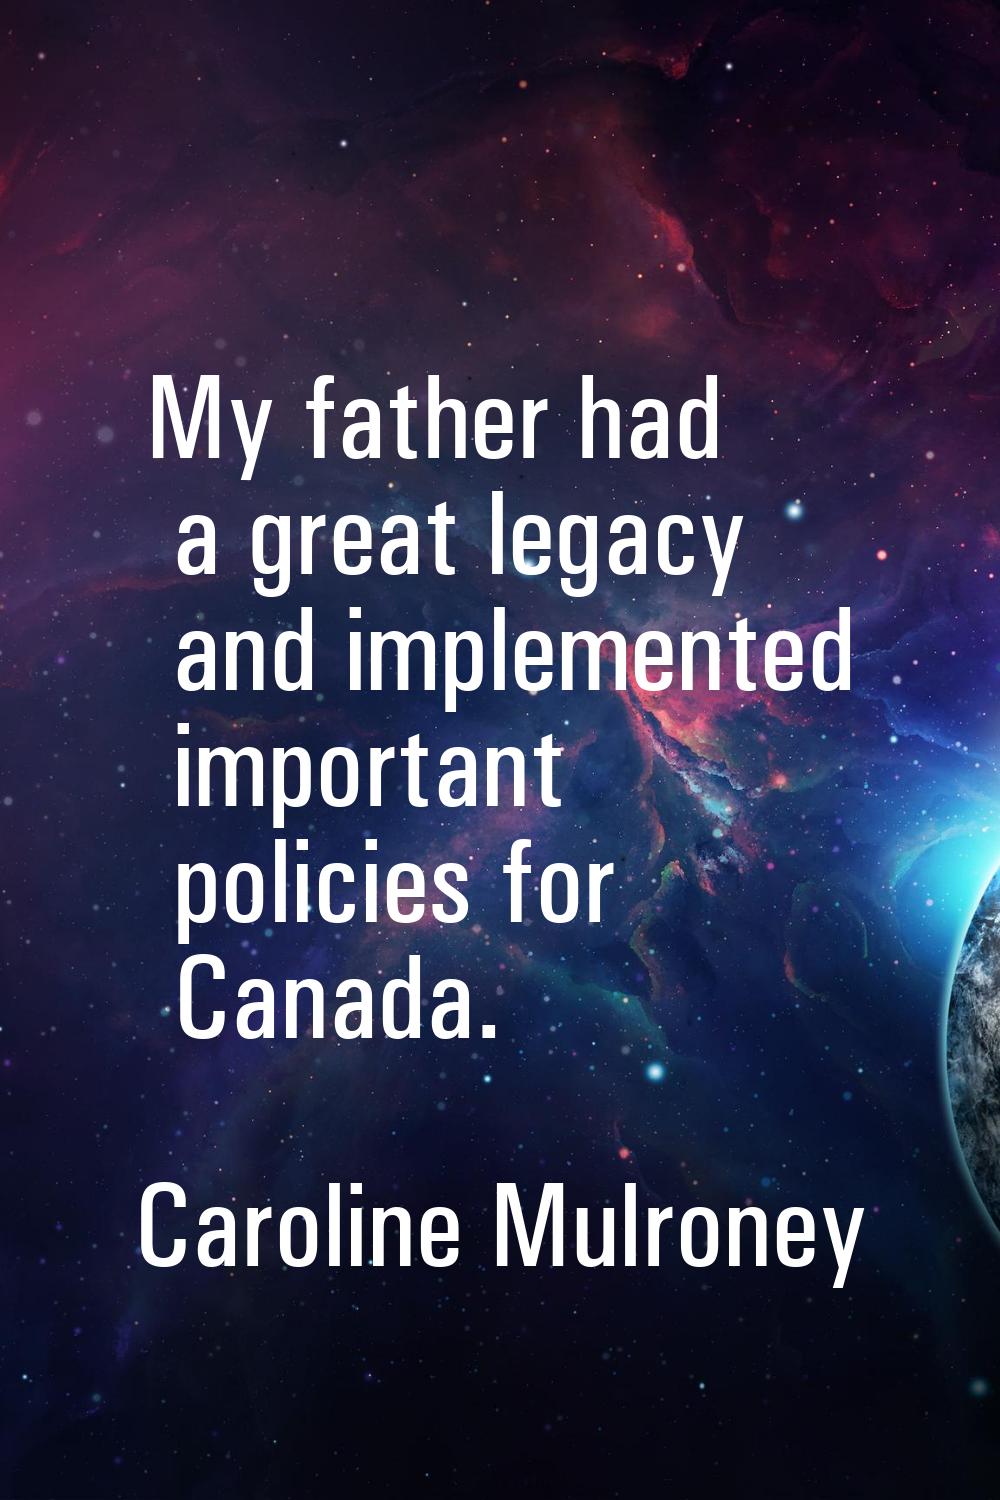 My father had a great legacy and implemented important policies for Canada.